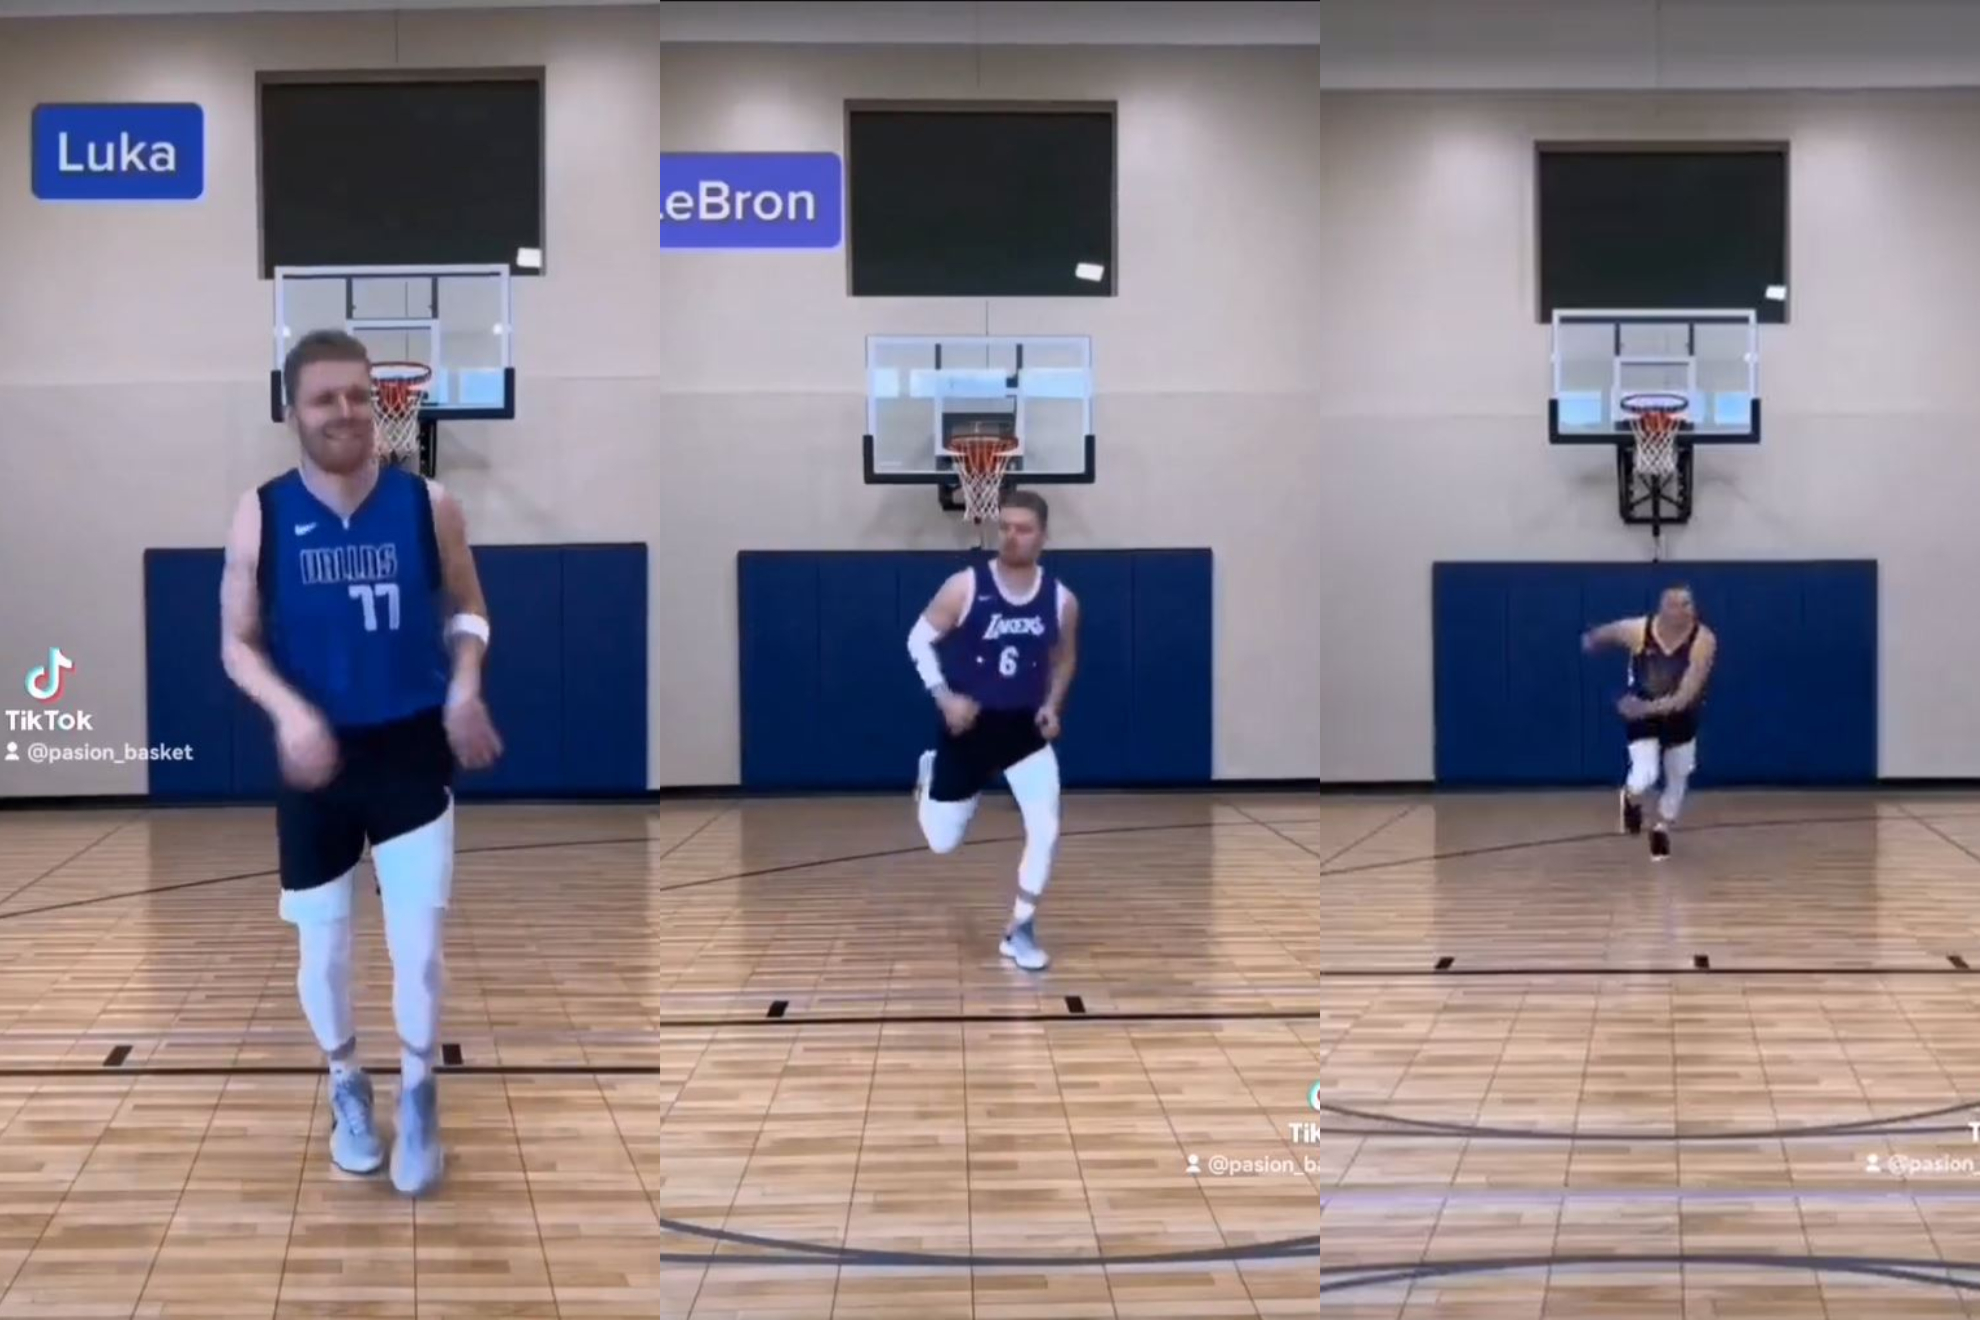 This incredible NBA impersonator runs just like the stars: See him mimic LeBron, Curry, Doncic...